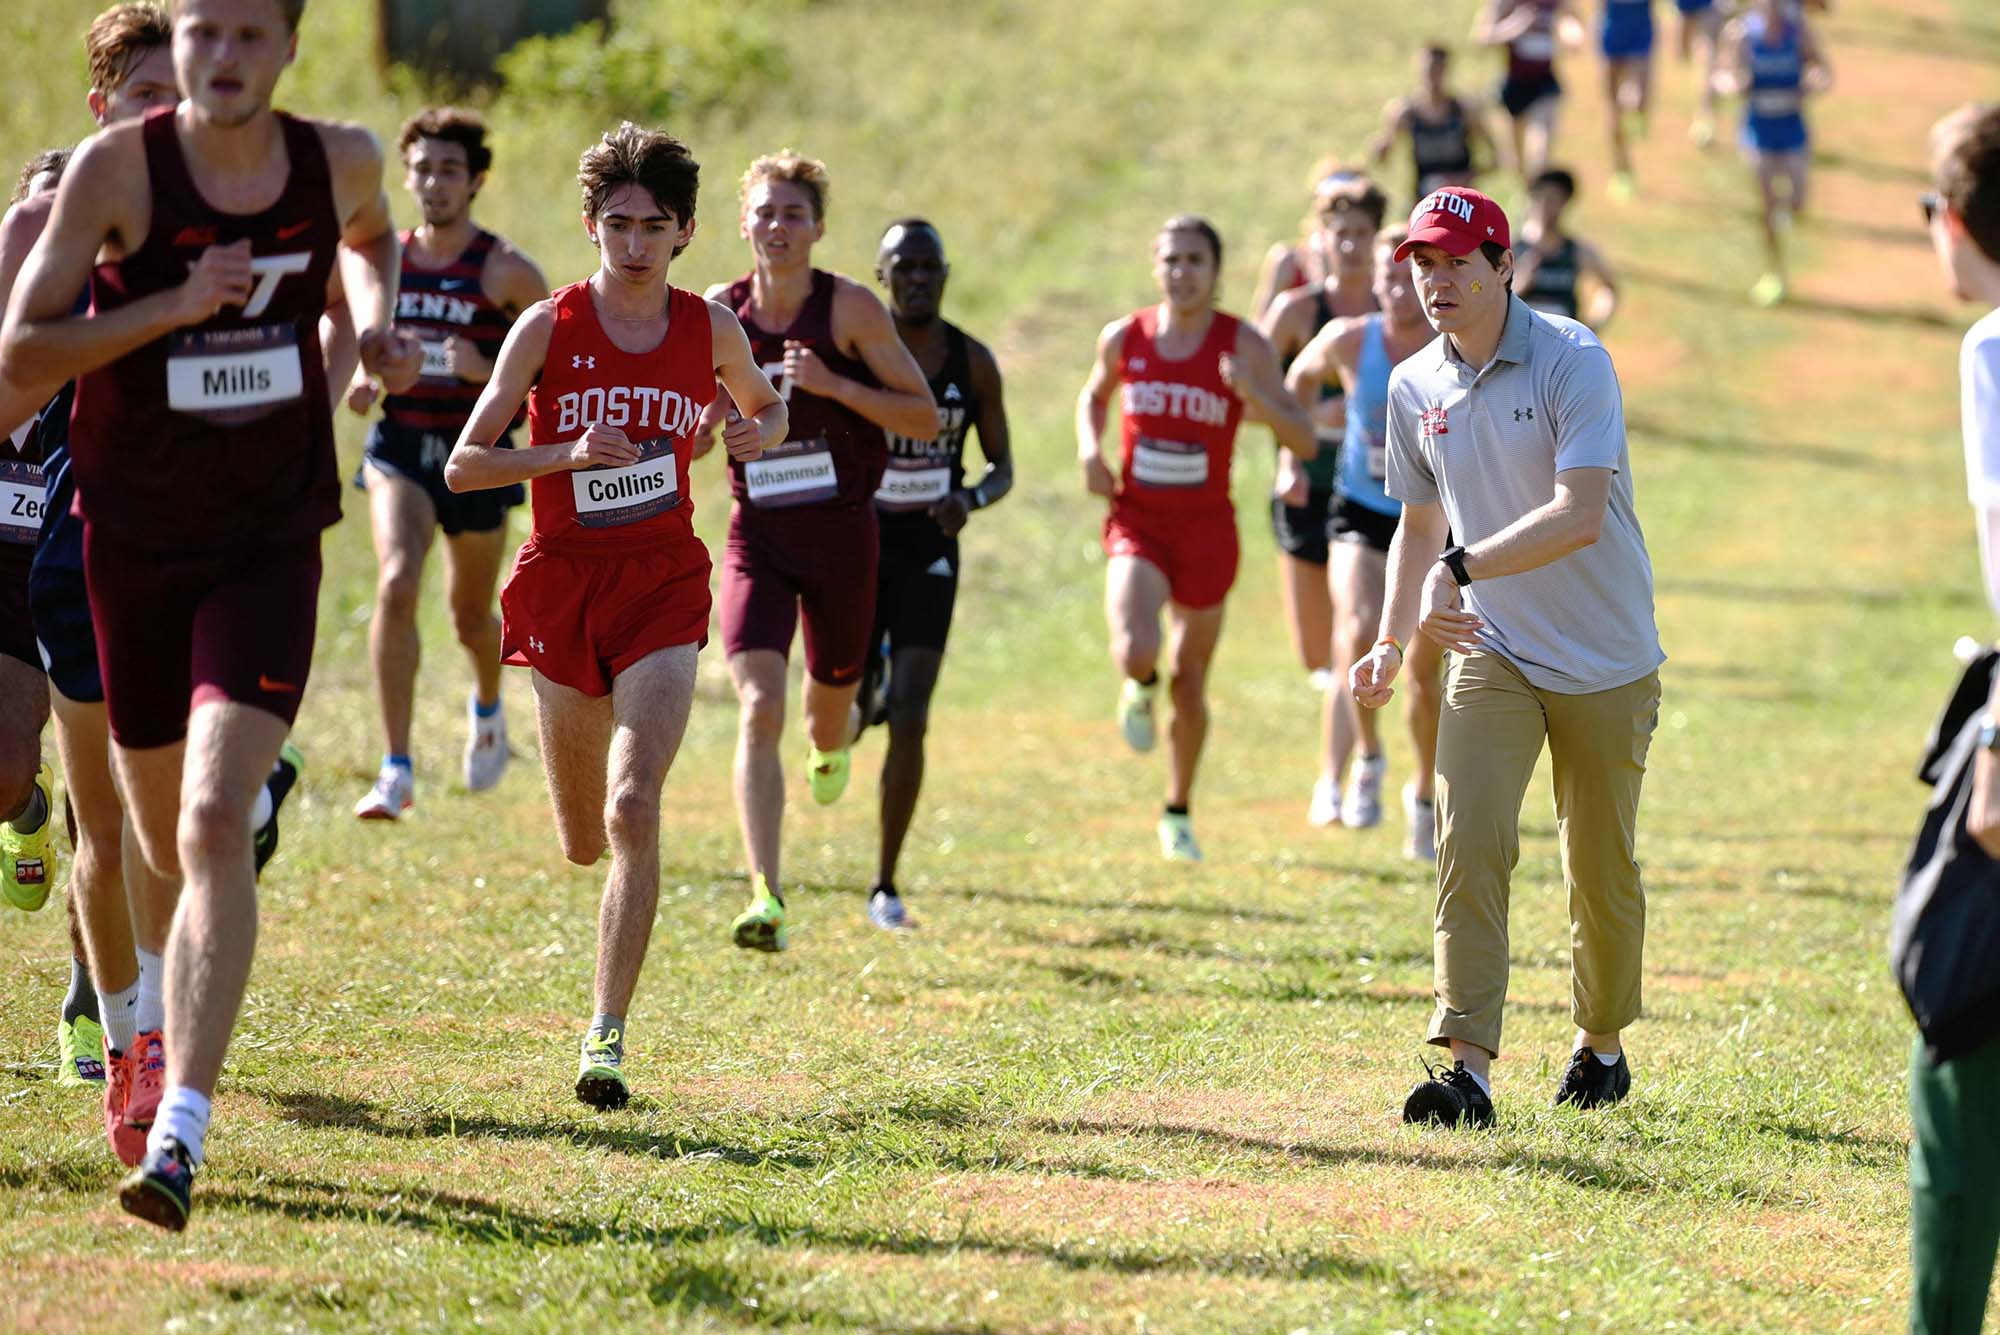 Photo: A group of young men race towards the camera on a grassy field. The lead person wears the scarlet BU cross country jersey and shorts as other wearing Navy uniforms and similar BU uniforms race after him. On the right, a man wearing khaki pants, a red BY cap, and light gray collared shirt, cheers on the side.